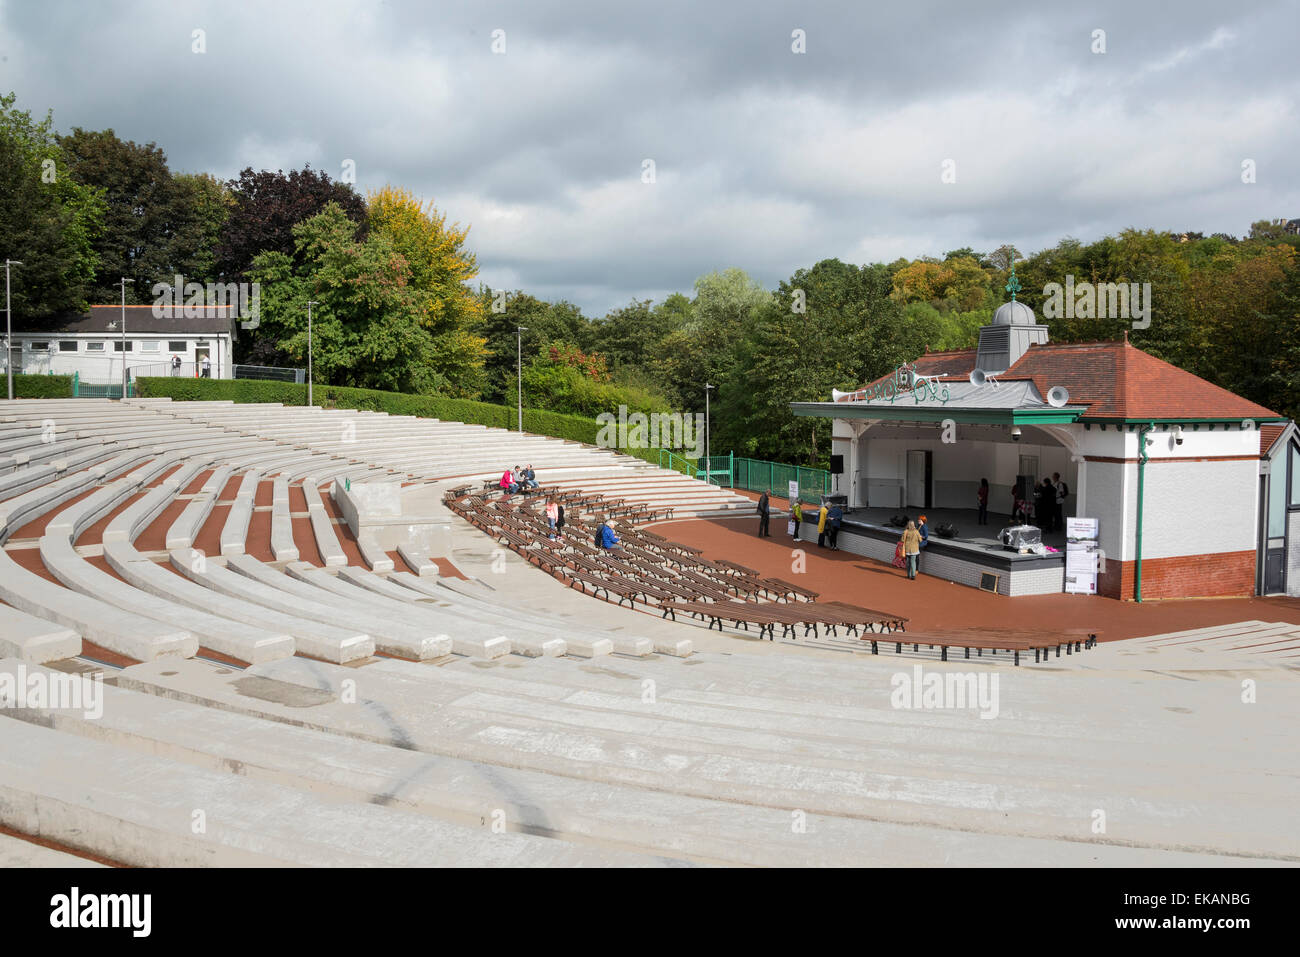 Kelvingrove Park Bandstand venue in Glasgow with amphitheater-style seating. Stock Photo